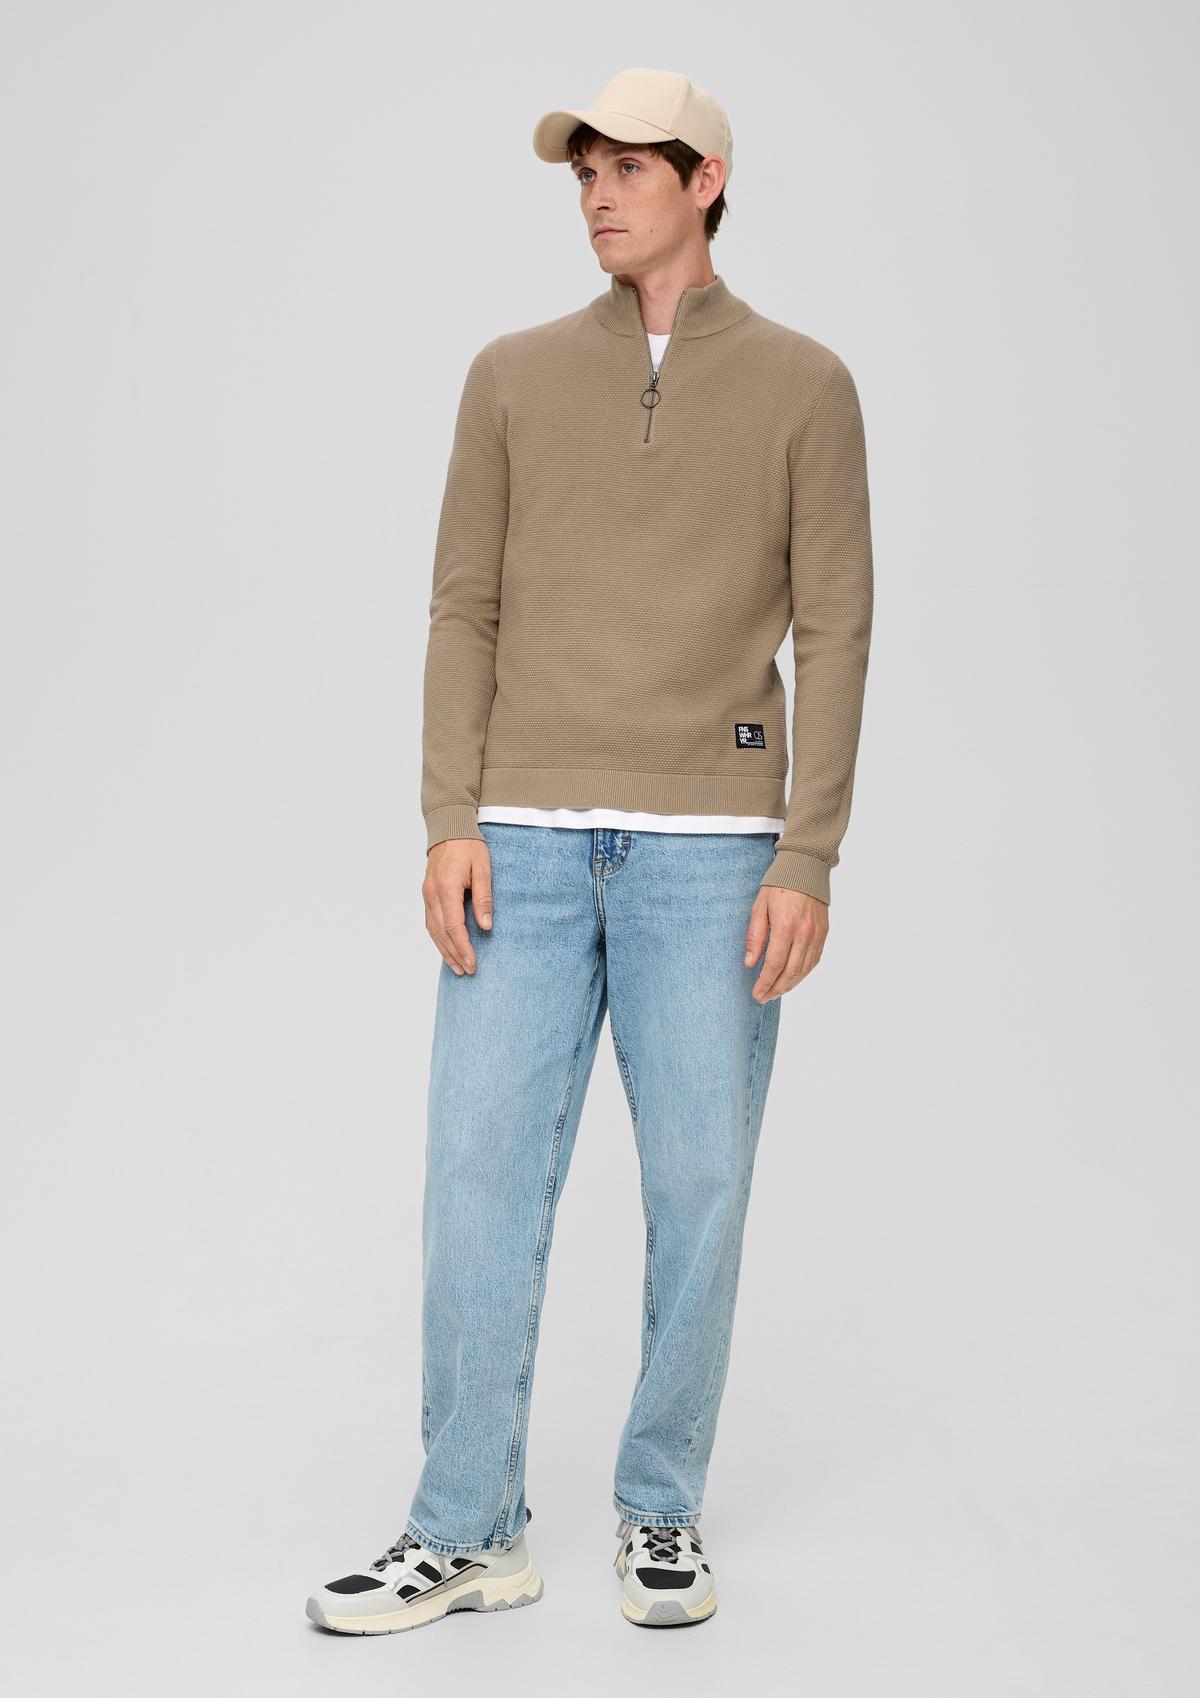 s.Oliver Jumper in a textured knit